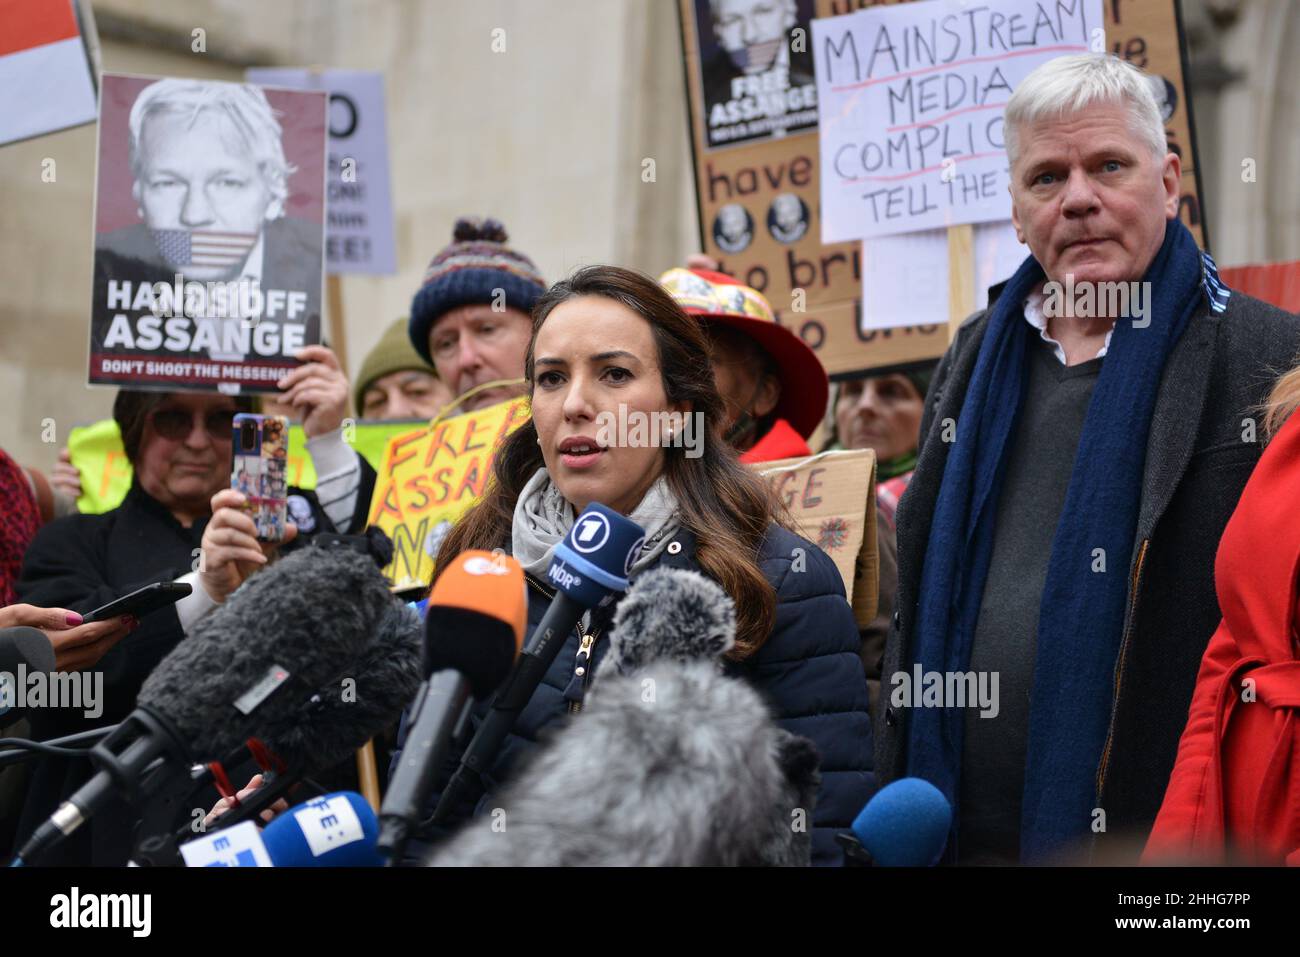 Julian Assange's fiancee Stella Moris speaks to the media outside The Royal Courts of Justice in London. Assange granted permission to seek extradition appeal at UK's top court. Stock Photo